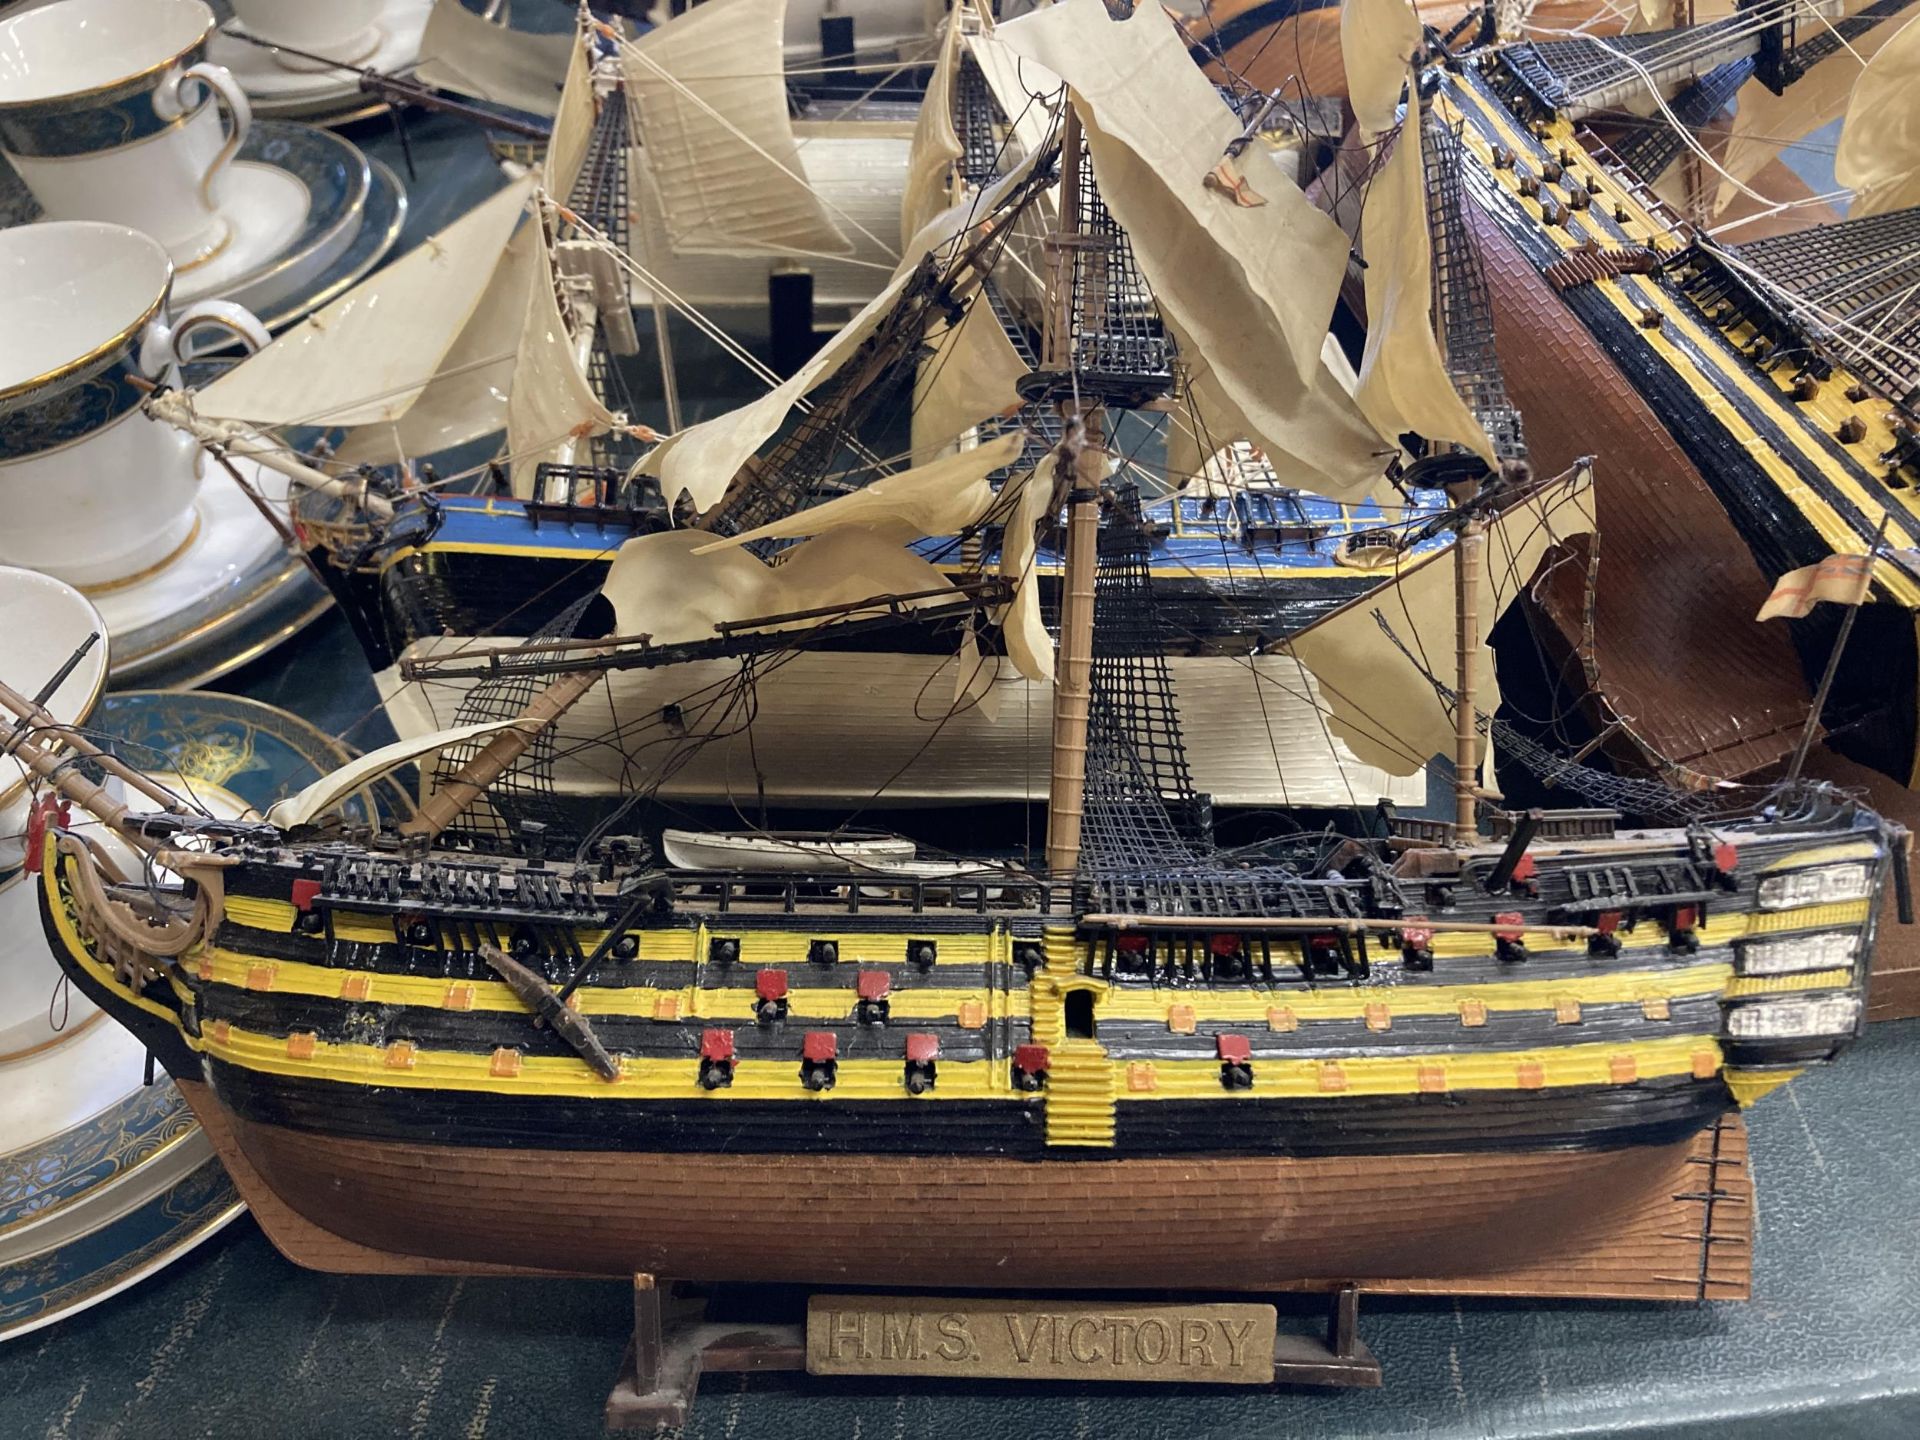 A COLLECTION OF SAILING SHIPS TO INCLUDE HMS VICTORY, THE GOLDEN HIND, HMS BOUNTY, ETC - Image 2 of 4